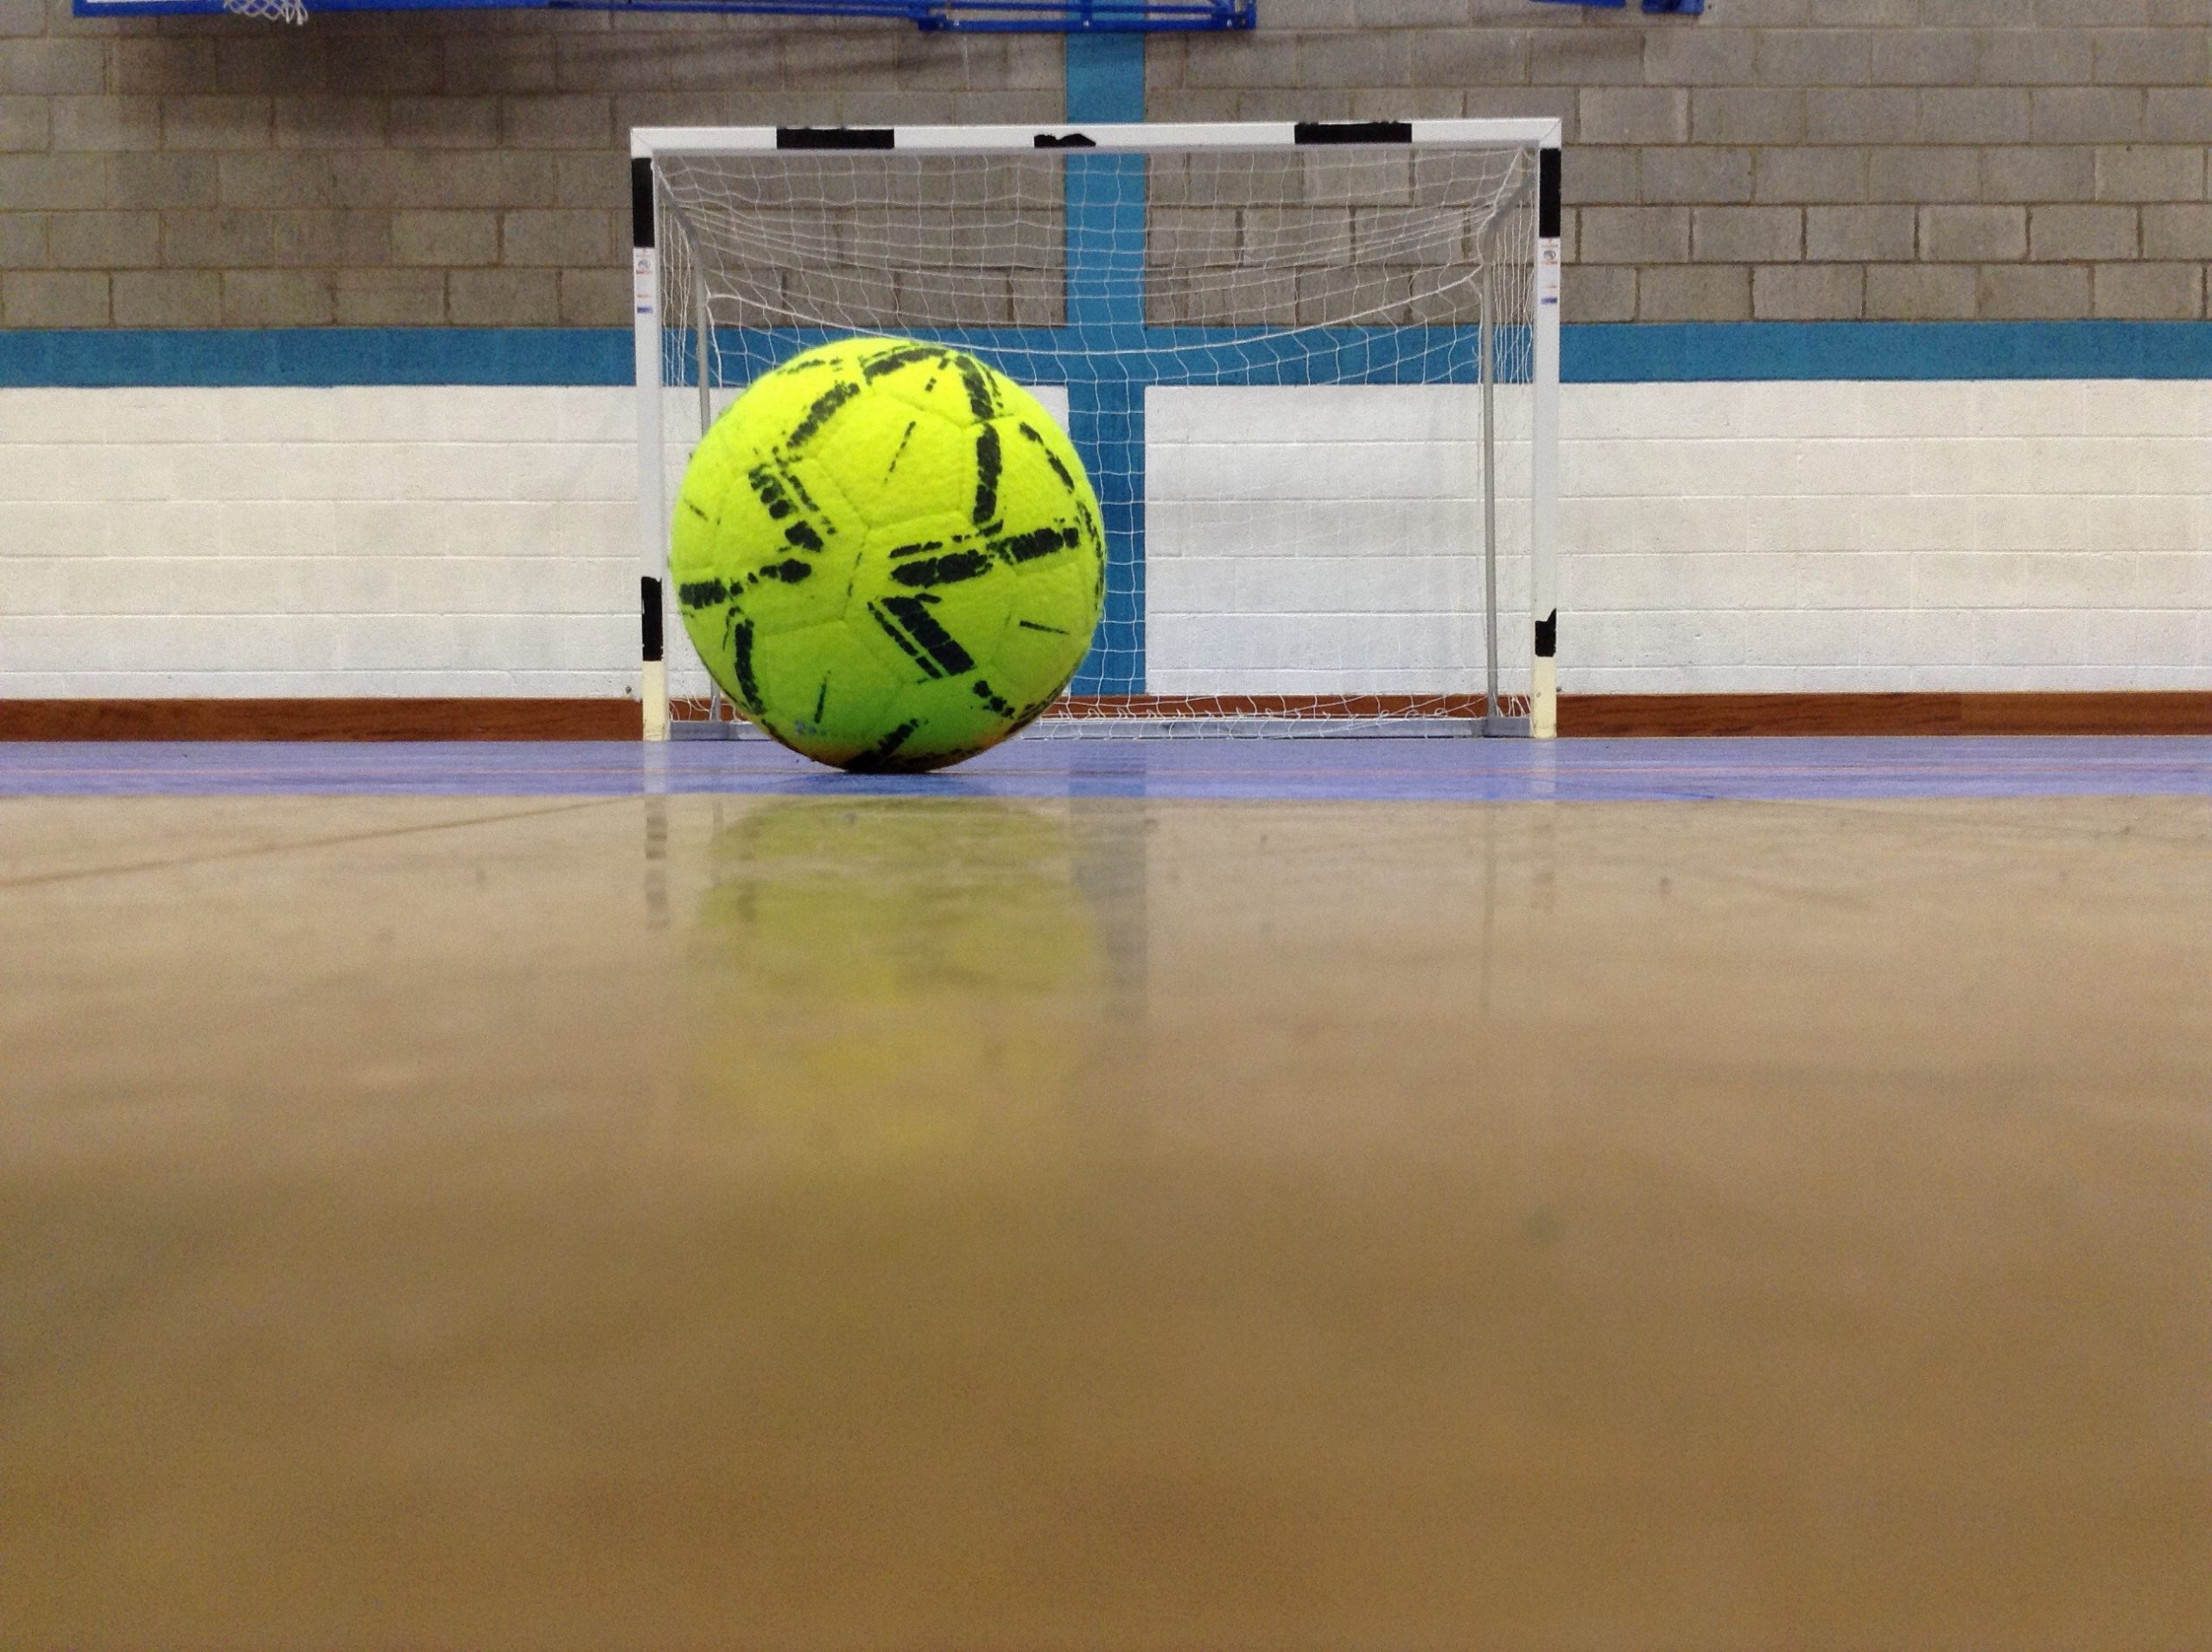 Indoor football pitch ideal for bad weather